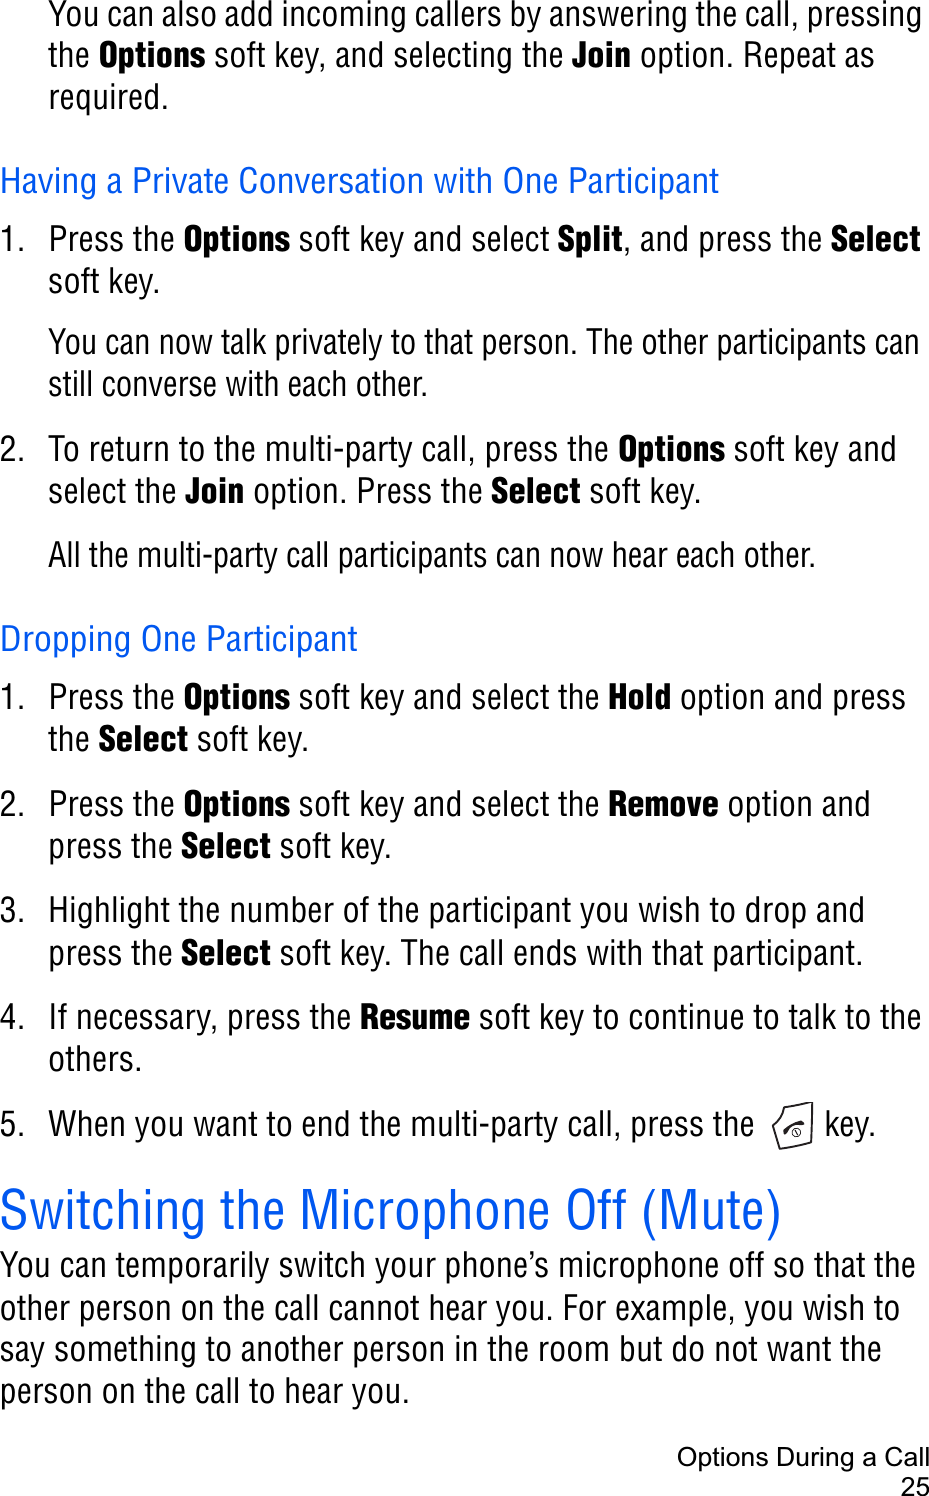 Options During a Call25You can also add incoming callers by answering the call, pressing the Options soft key, and selecting the Join option. Repeat as required.Having a Private Conversation with One Participant1. Press the Options soft key and select Split, and press the Selectsoft key.You can now talk privately to that person. The other participants can still converse with each other.2. To return to the multi-party call, press the Options soft key and select the Join option. Press the Select soft key.All the multi-party call participants can now hear each other.Dropping One Participant1. Press the Options soft key and select the Hold option and press the Select soft key. 2. Press the Options soft key and select the Remove option and press the Select soft key.3. Highlight the number of the participant you wish to drop and press the Select soft key. The call ends with that participant.4. If necessary, press the Resume soft key to continue to talk to the others.5. When you want to end the multi-party call, press the   key.Switching the Microphone Off (Mute)You can temporarily switch your phone’s microphone off so that the other person on the call cannot hear you. For example, you wish to say something to another person in the room but do not want the person on the call to hear you.